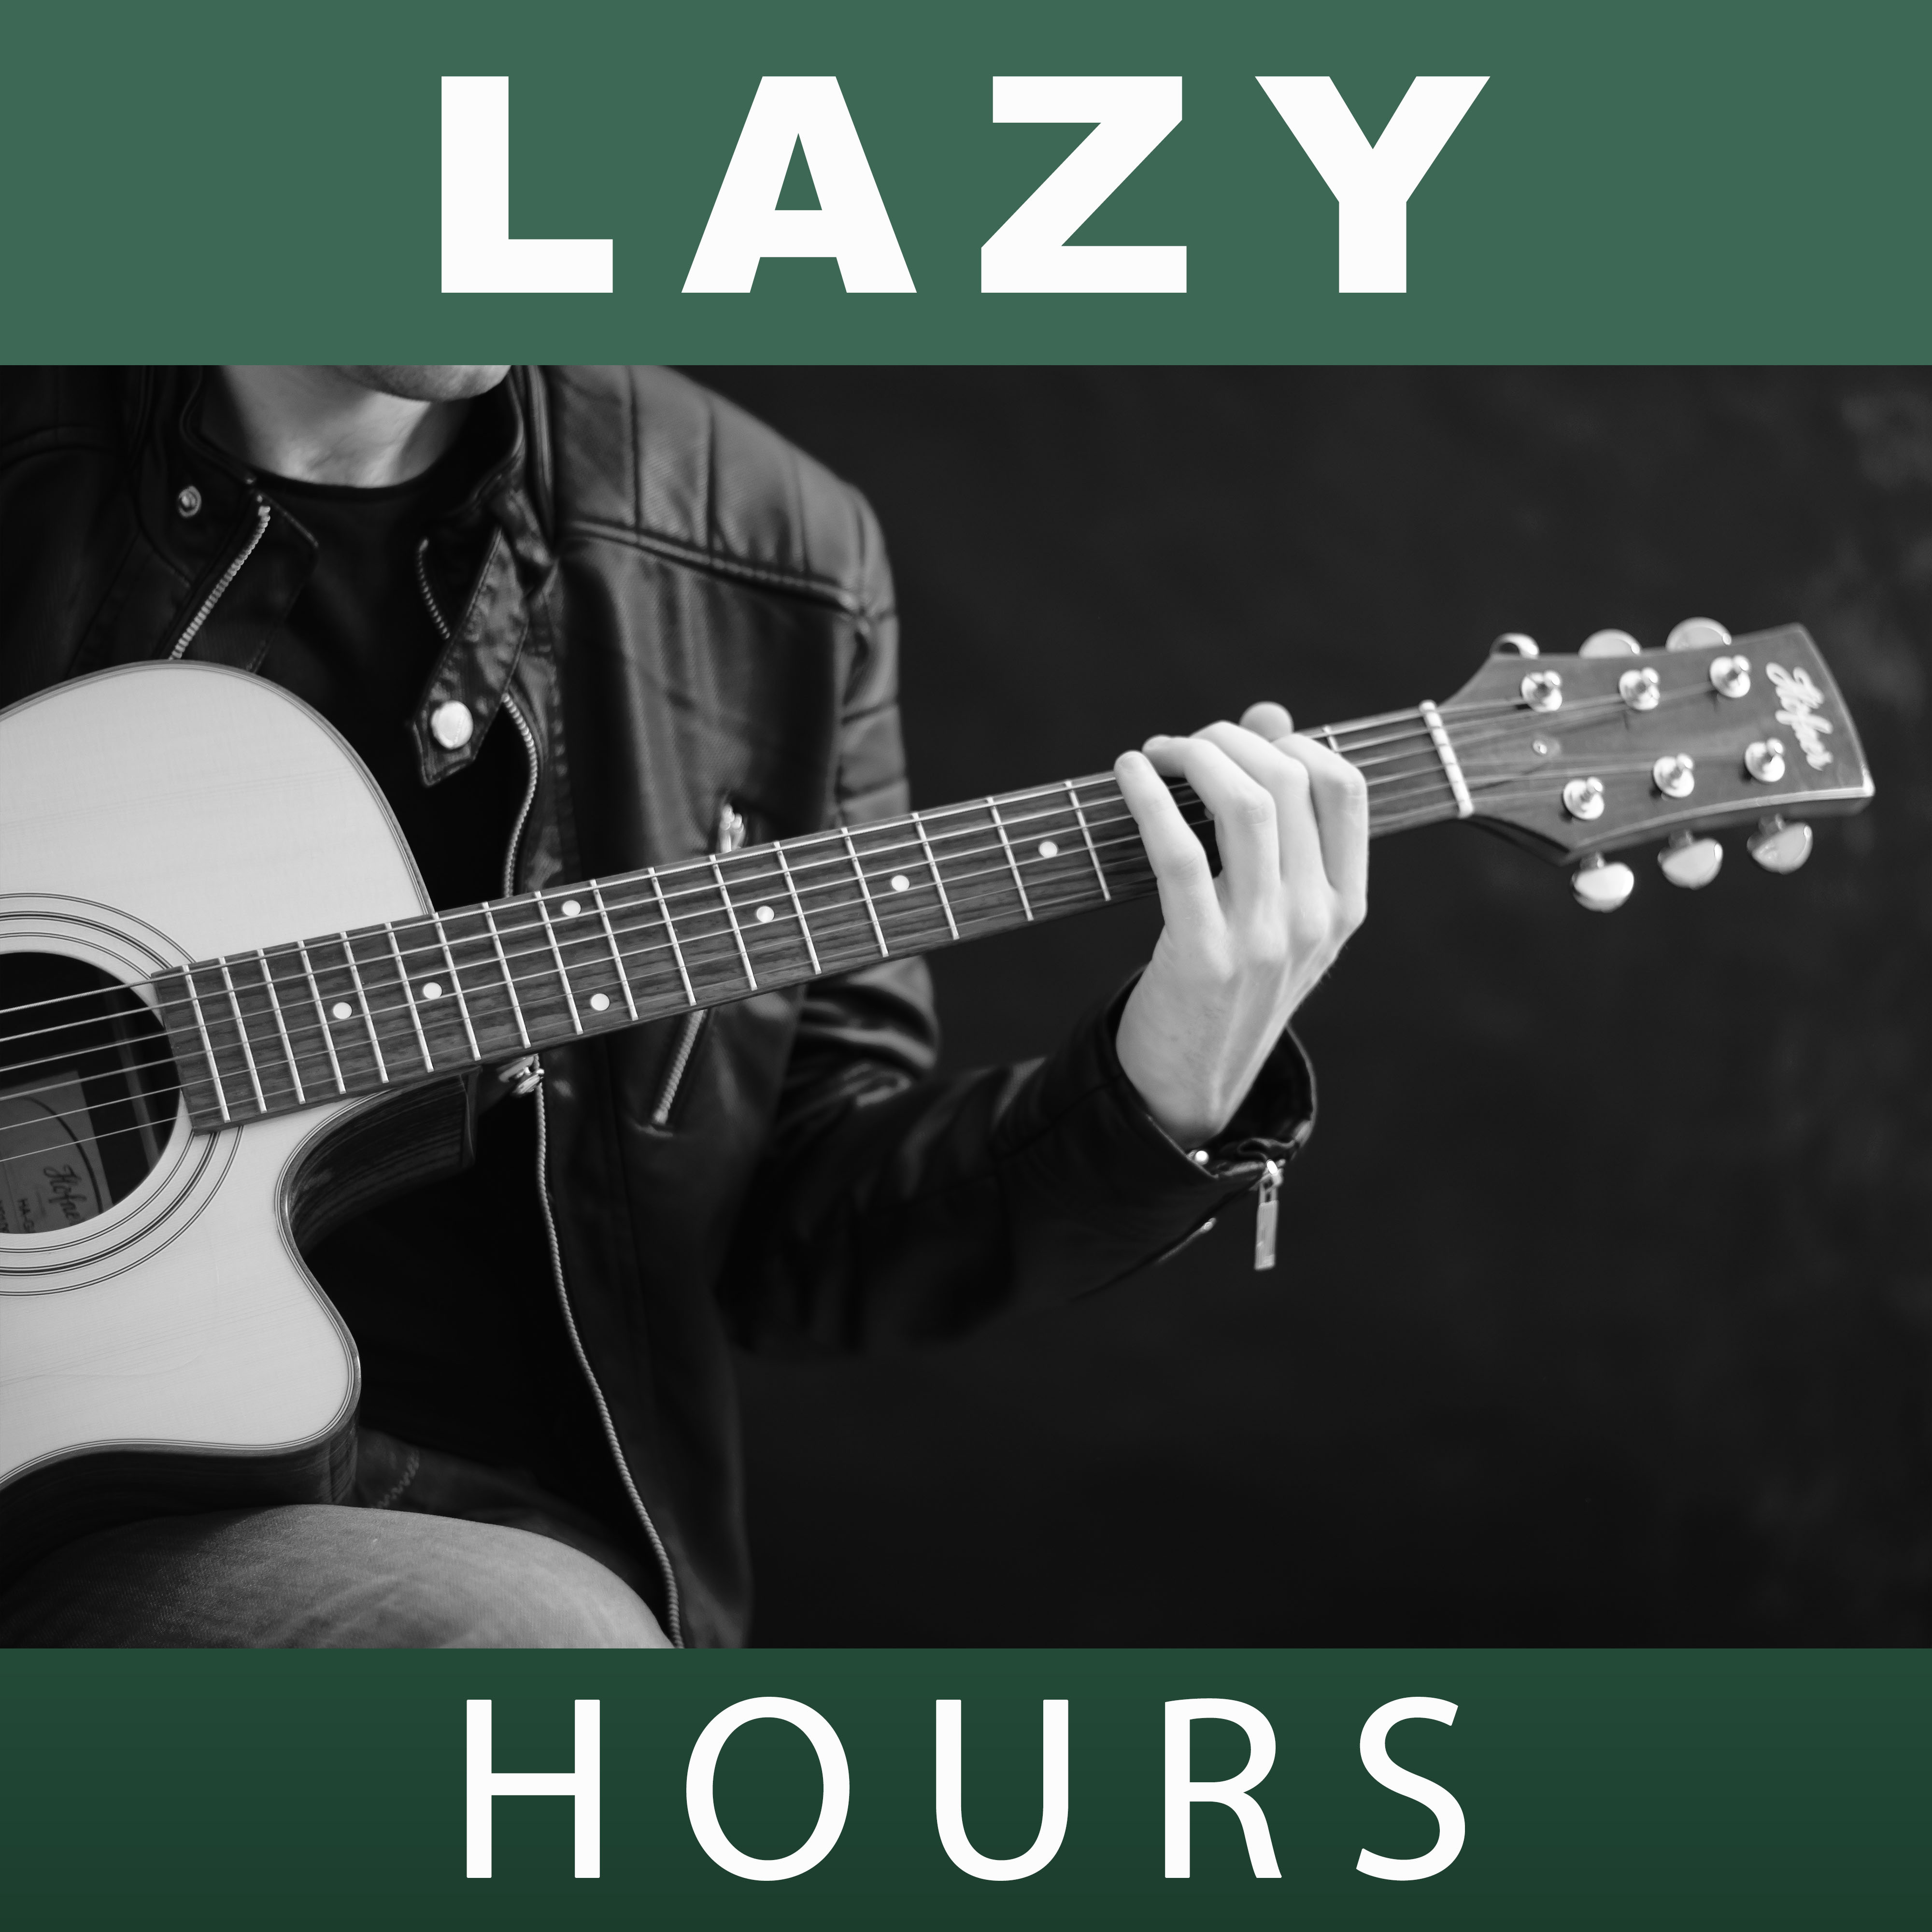 Lazy Hours  Melow Jazz, Piano Bar, Chilling Day, Relaxing Time, Easy Listening, Sleeping Hours